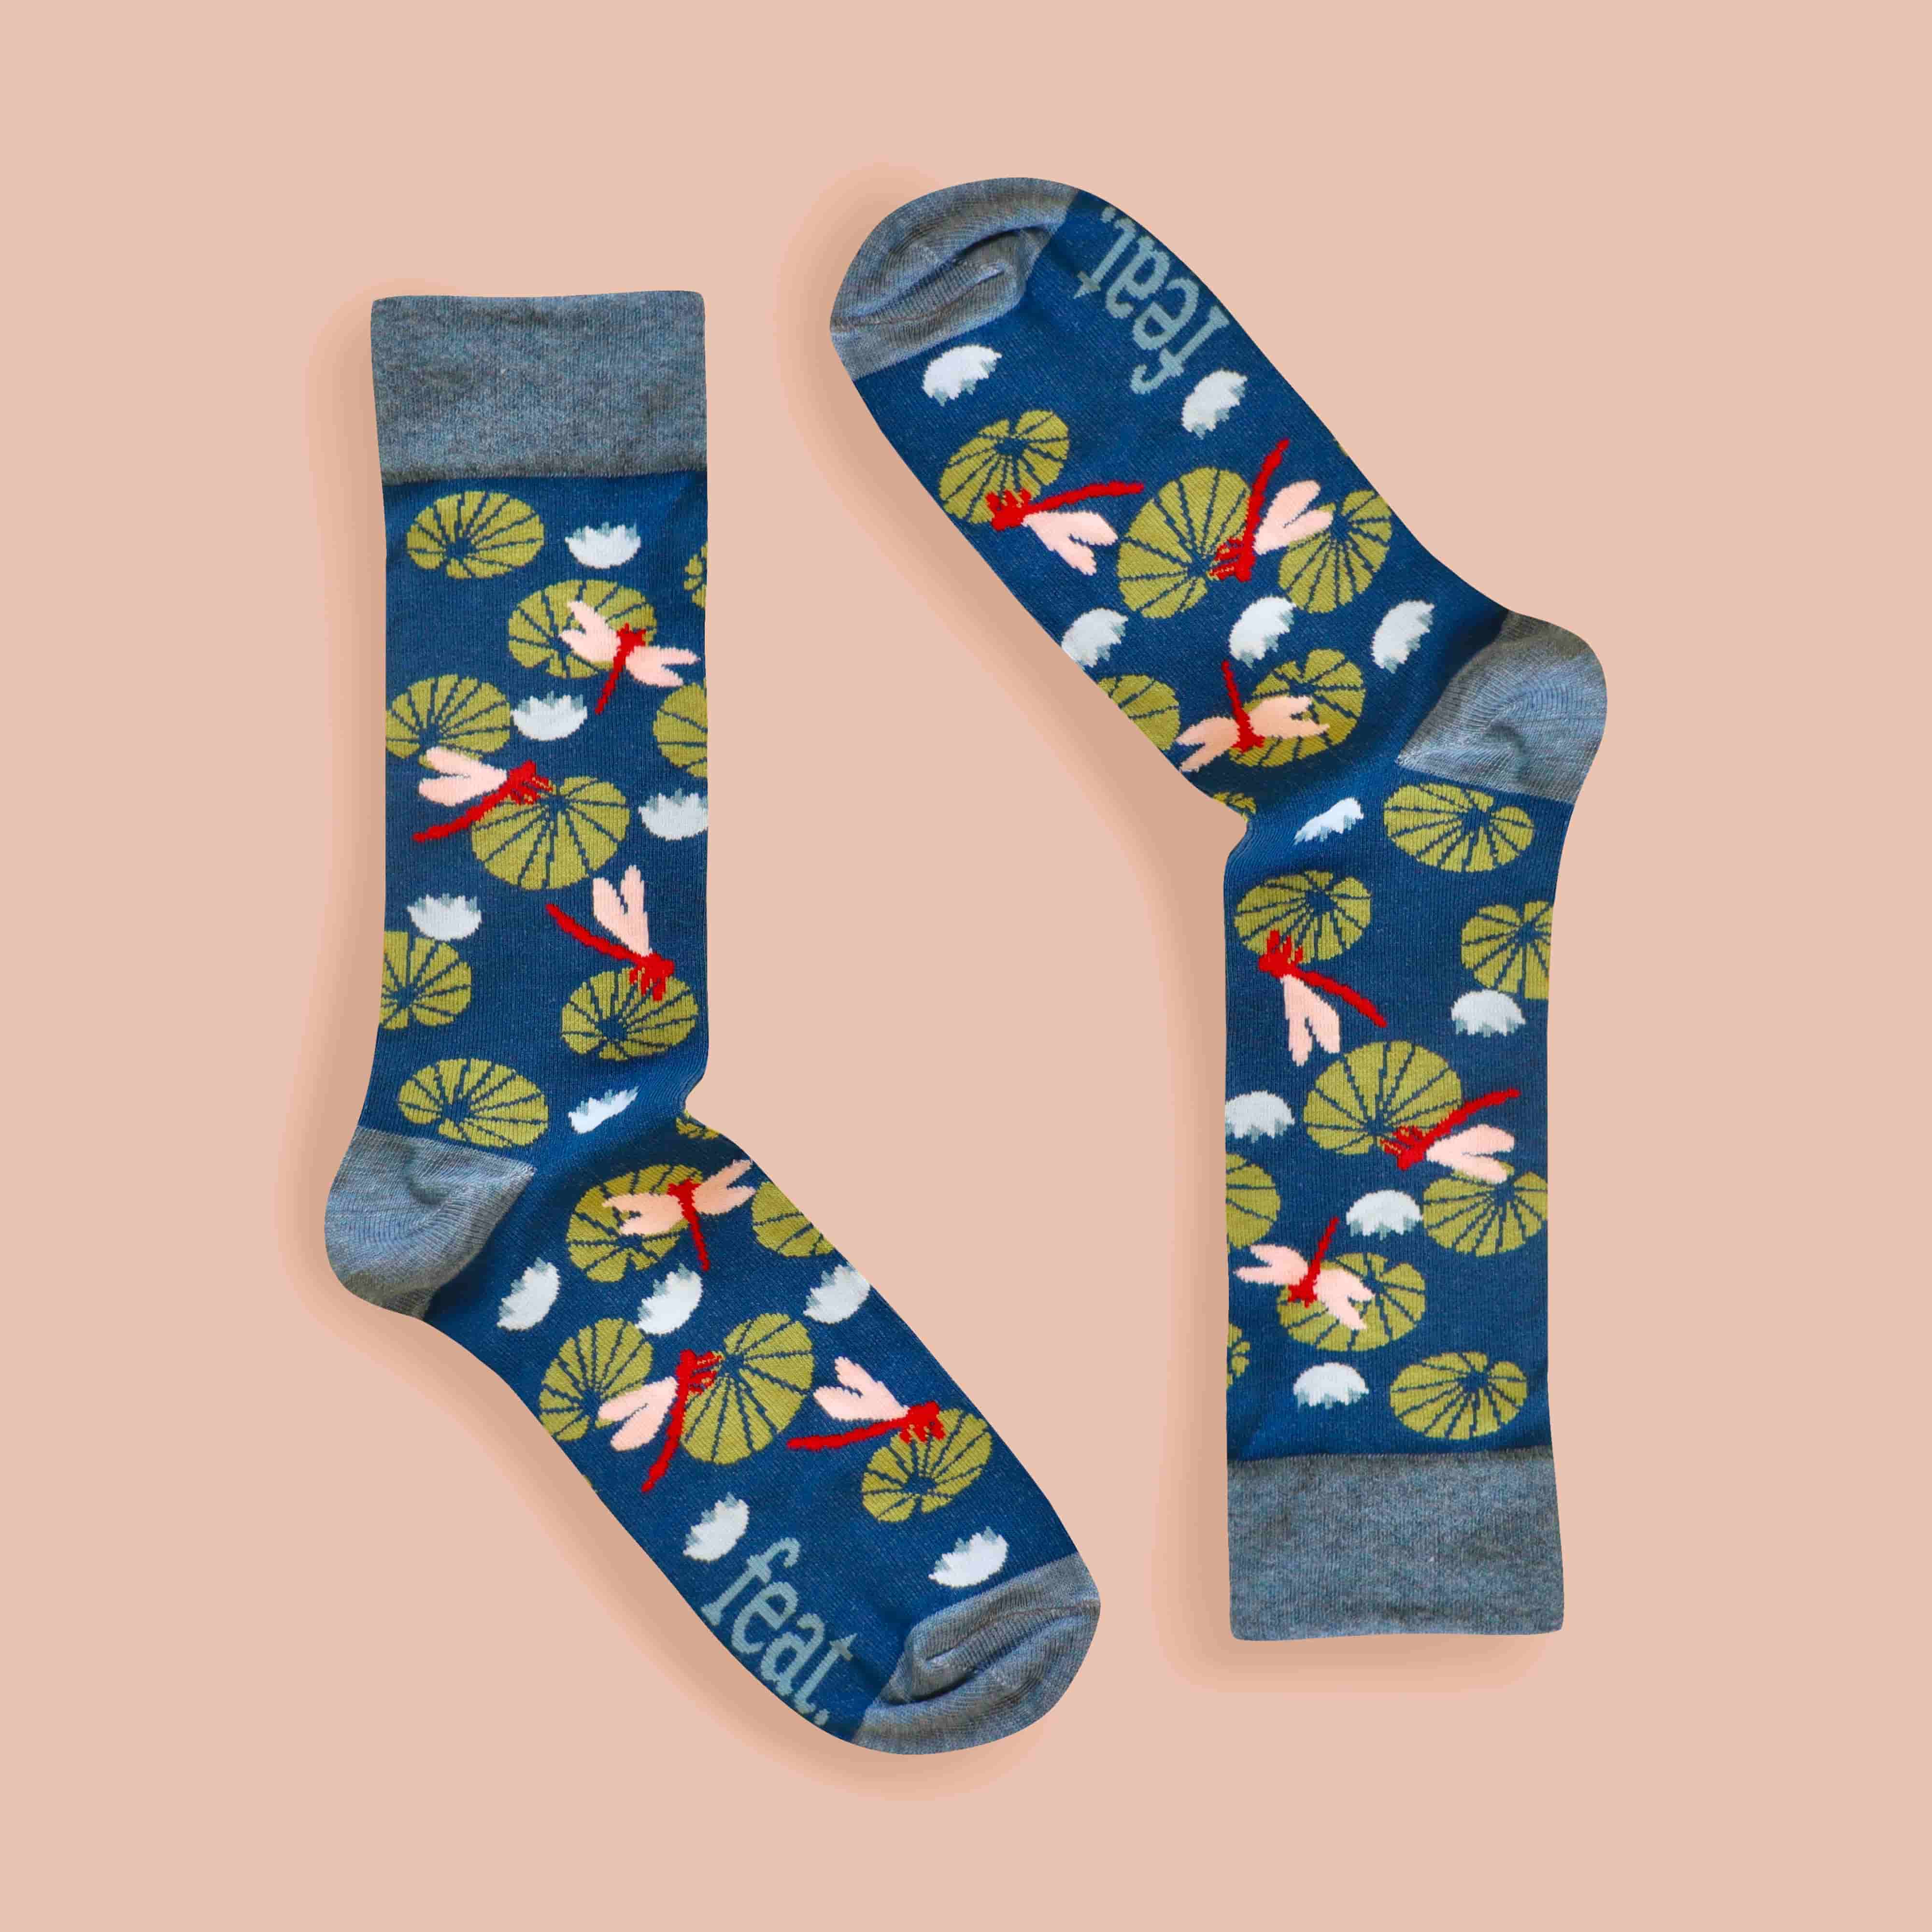 Dragonfly socks inverted image peach background